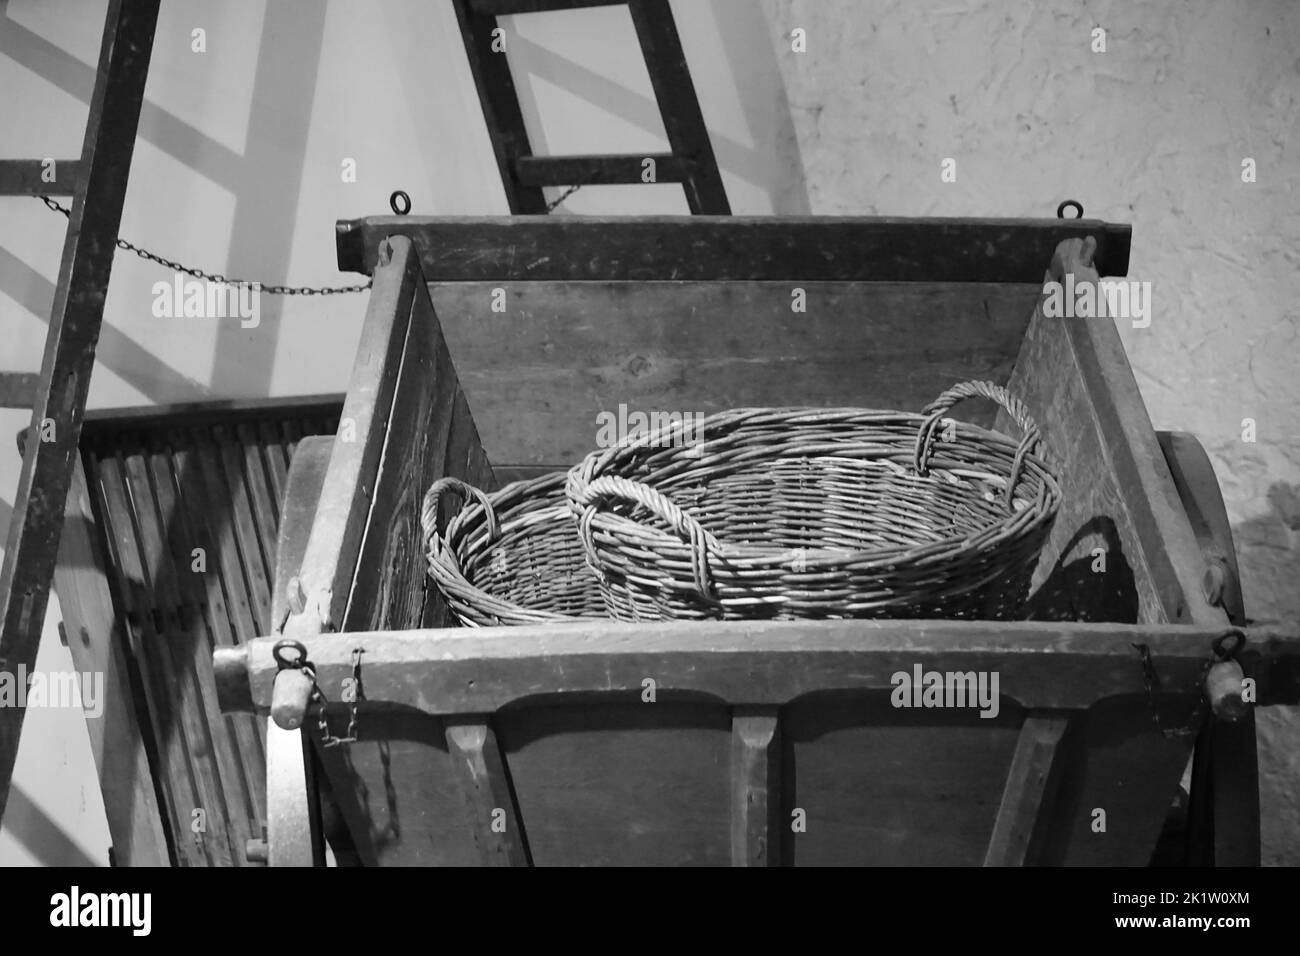 A black and white shot of an old metallic cart with a basket in it Stock Photo